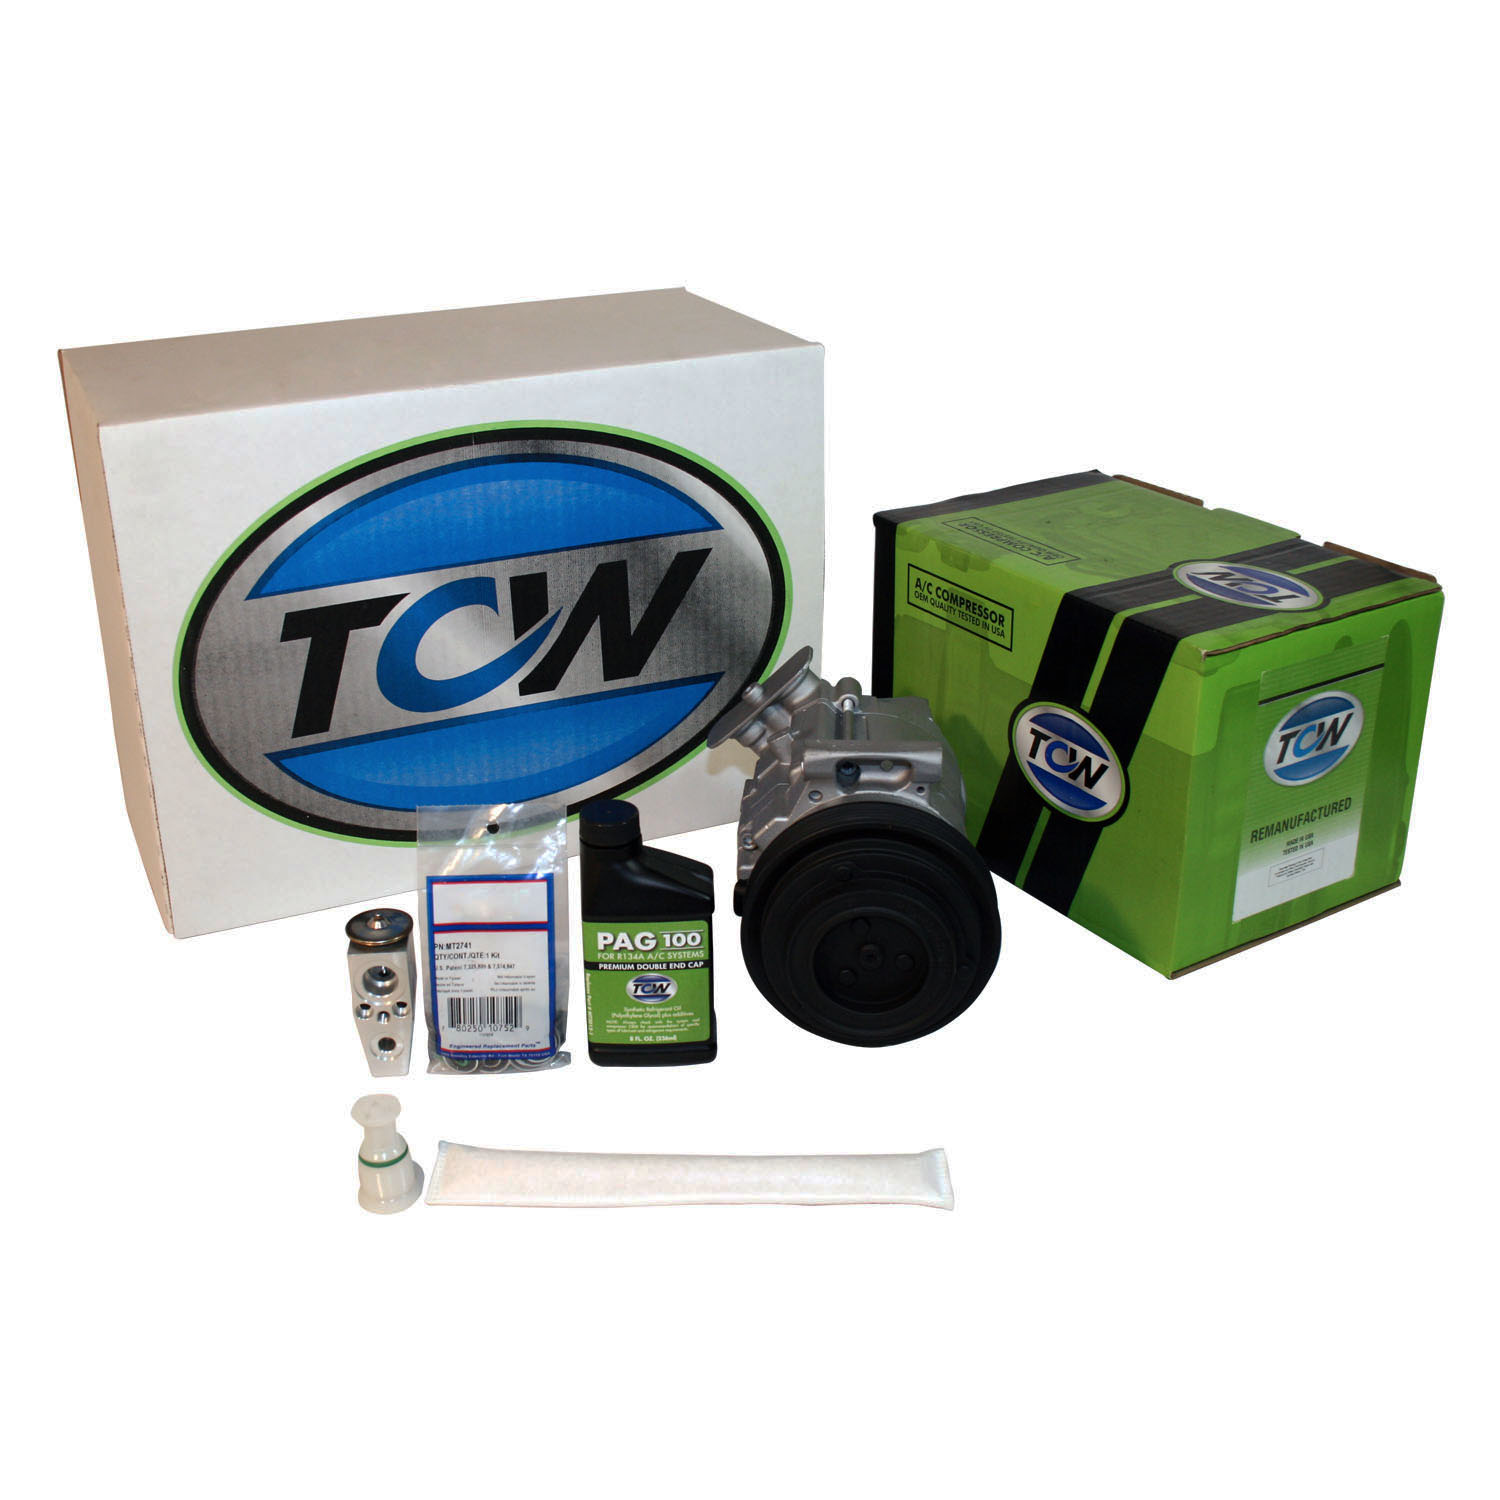 TCW Vehicle A/C Kit K1000476R Remanufactured Product Image field_60b6a13a6e67c